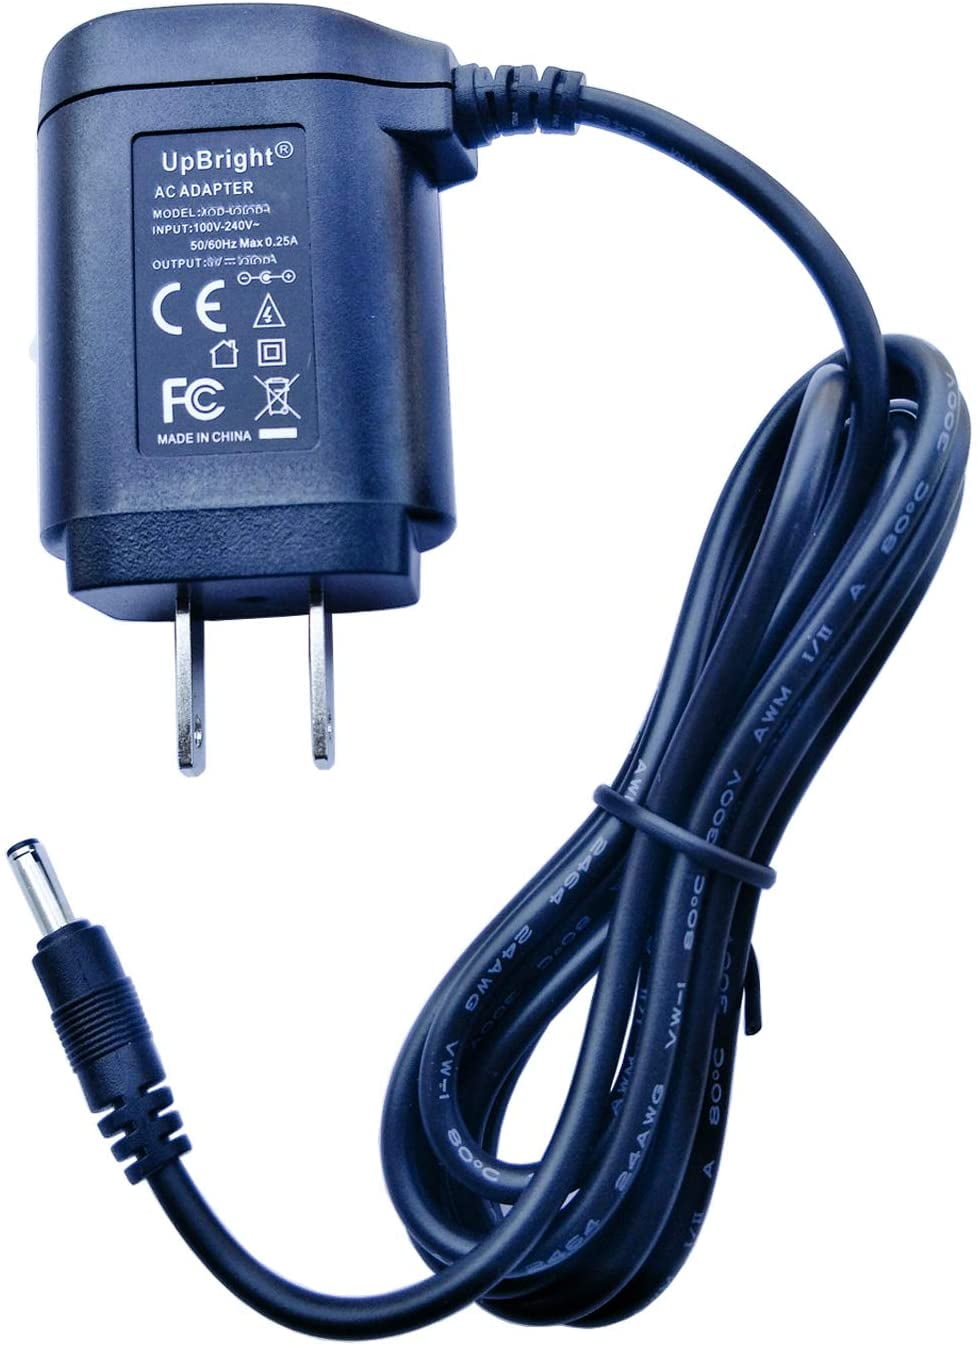 Worldwide 9 VOLT AC Adapter Charger For 9V 100mA 0.1A Transformer Power Supply 